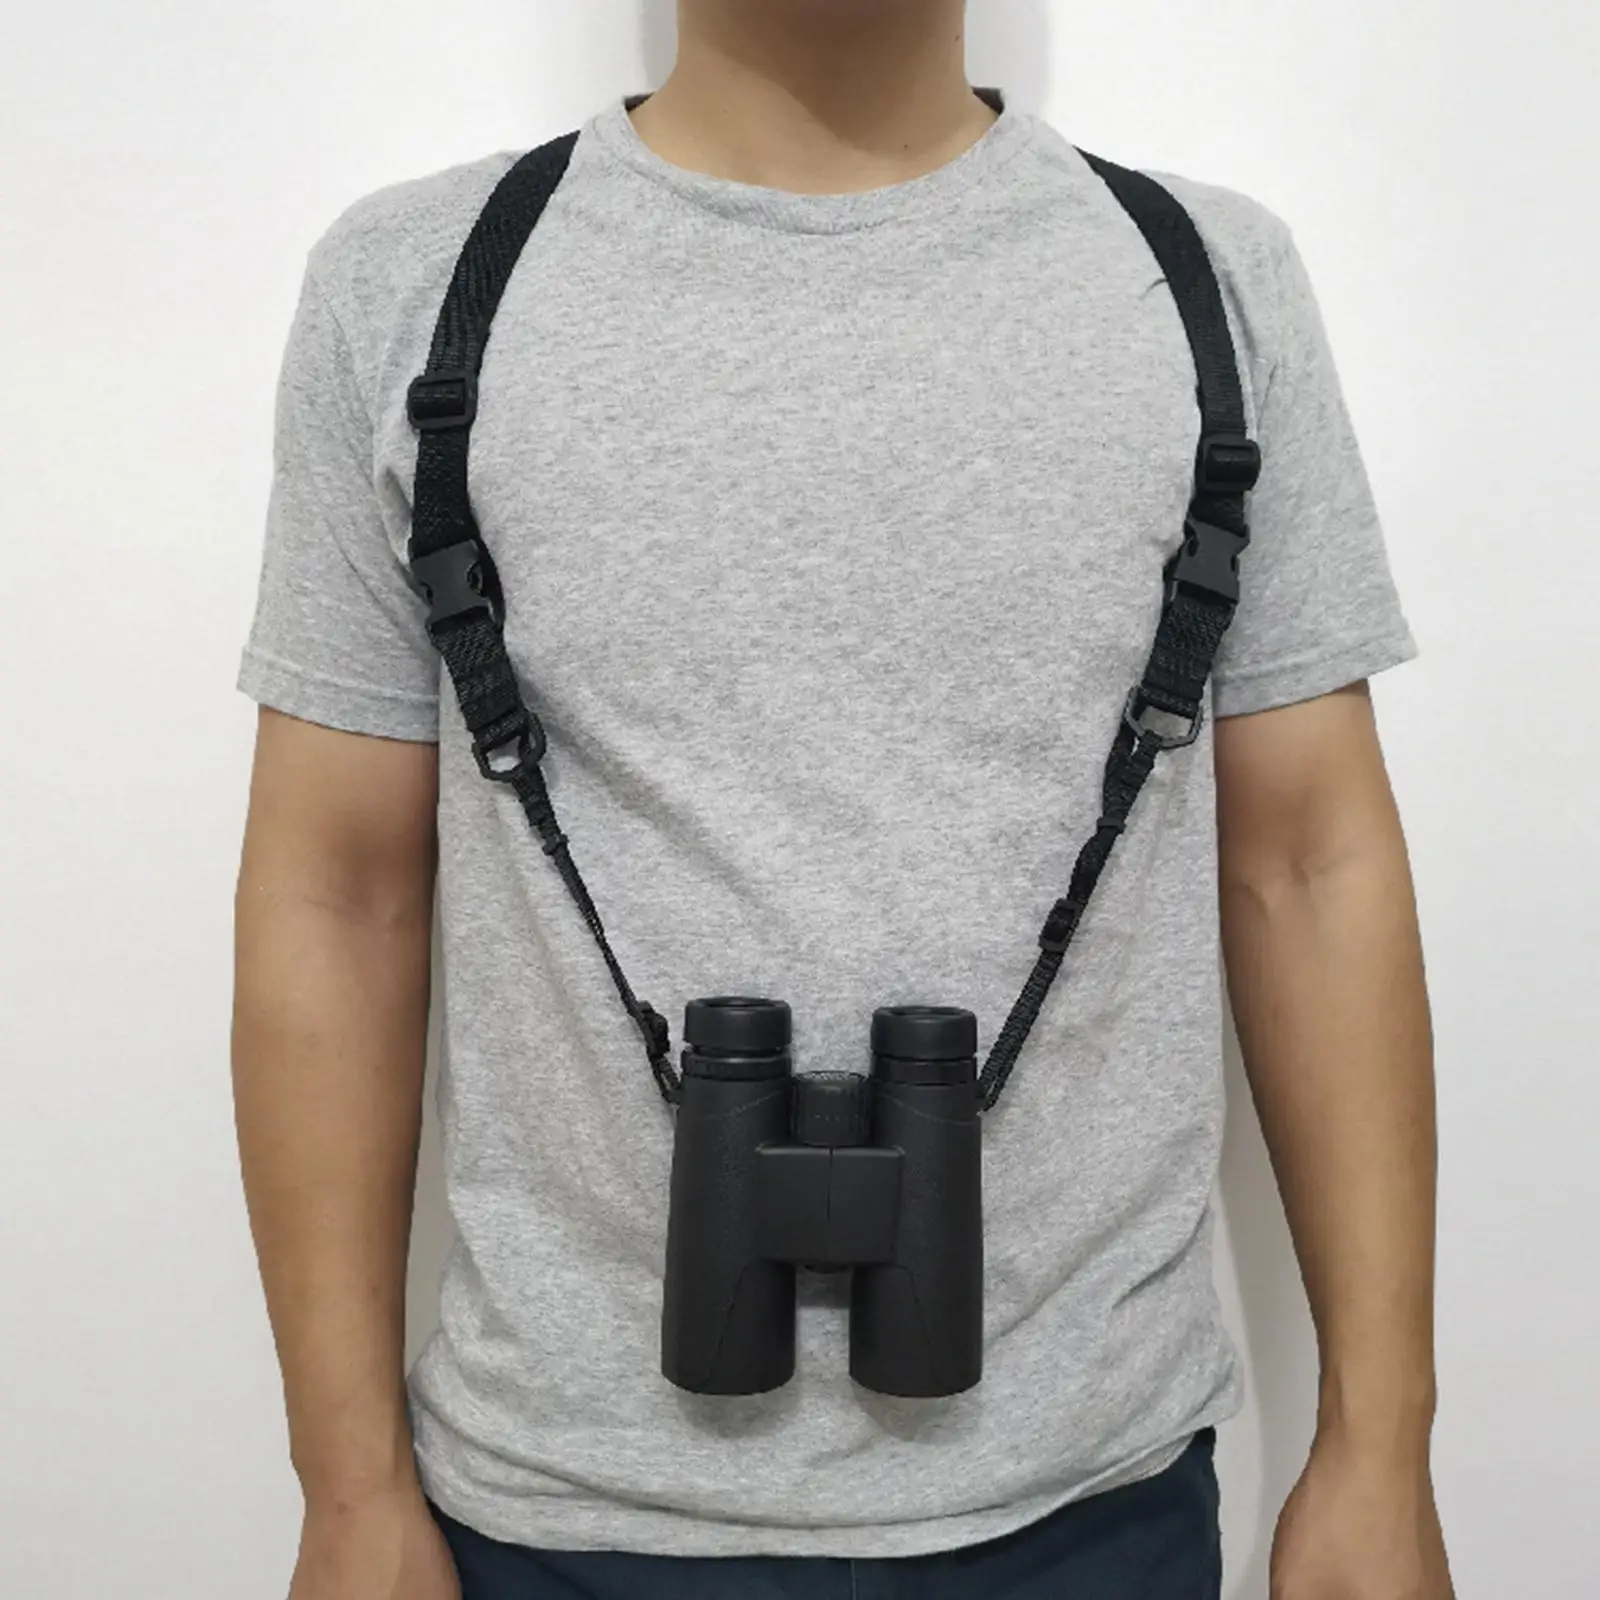 Adustable Cameras Binoculars Strap Professional Chest Harness Strap for Traveling